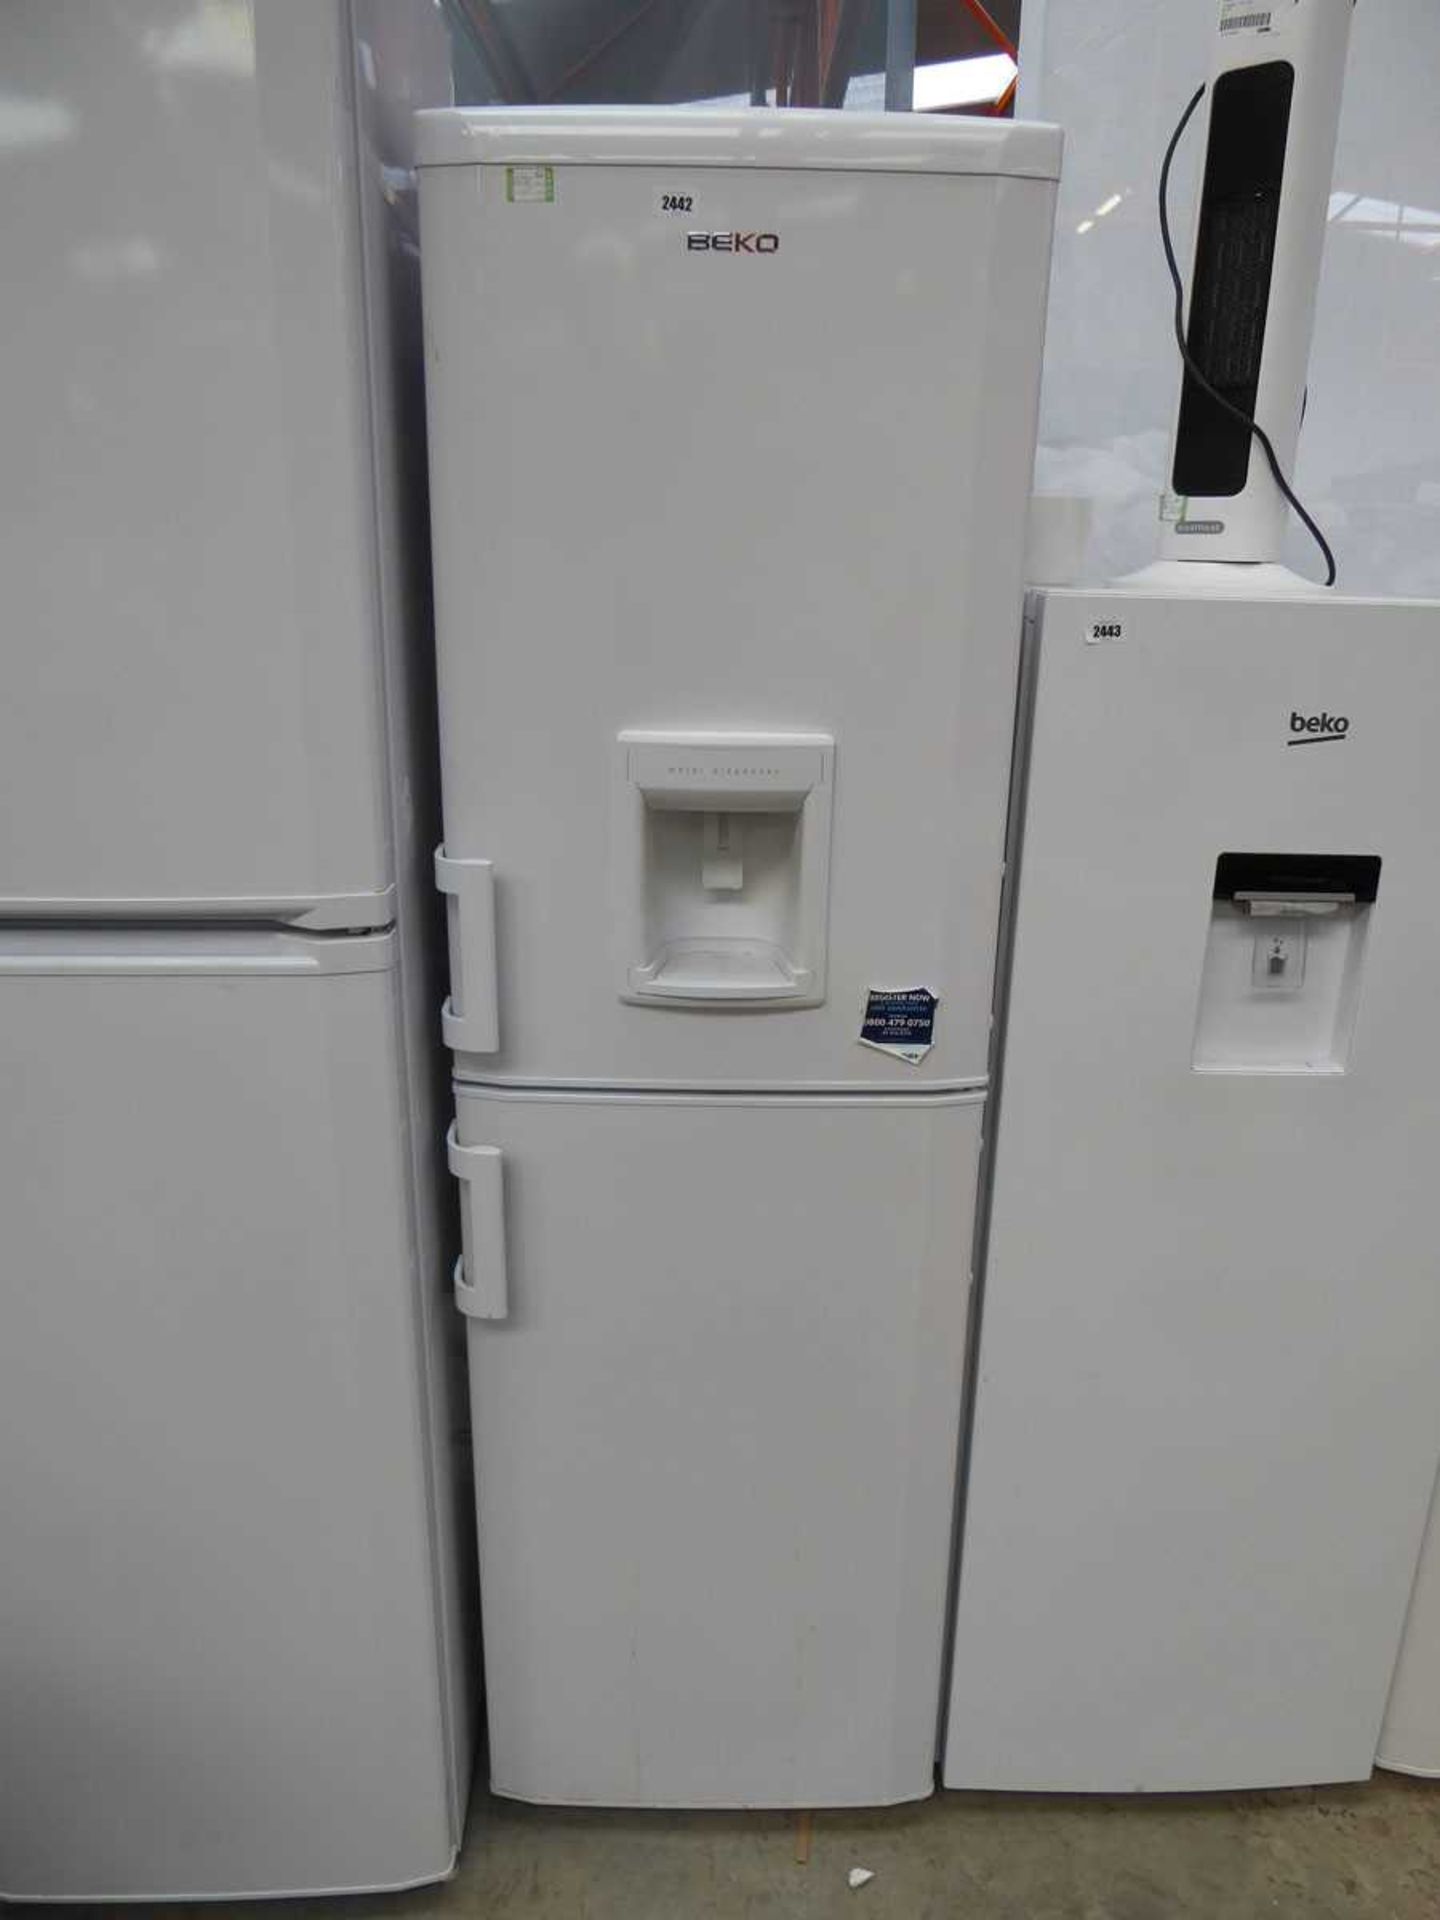 Beko A Class Frost Free fridge freezer in white with built in water dispenser